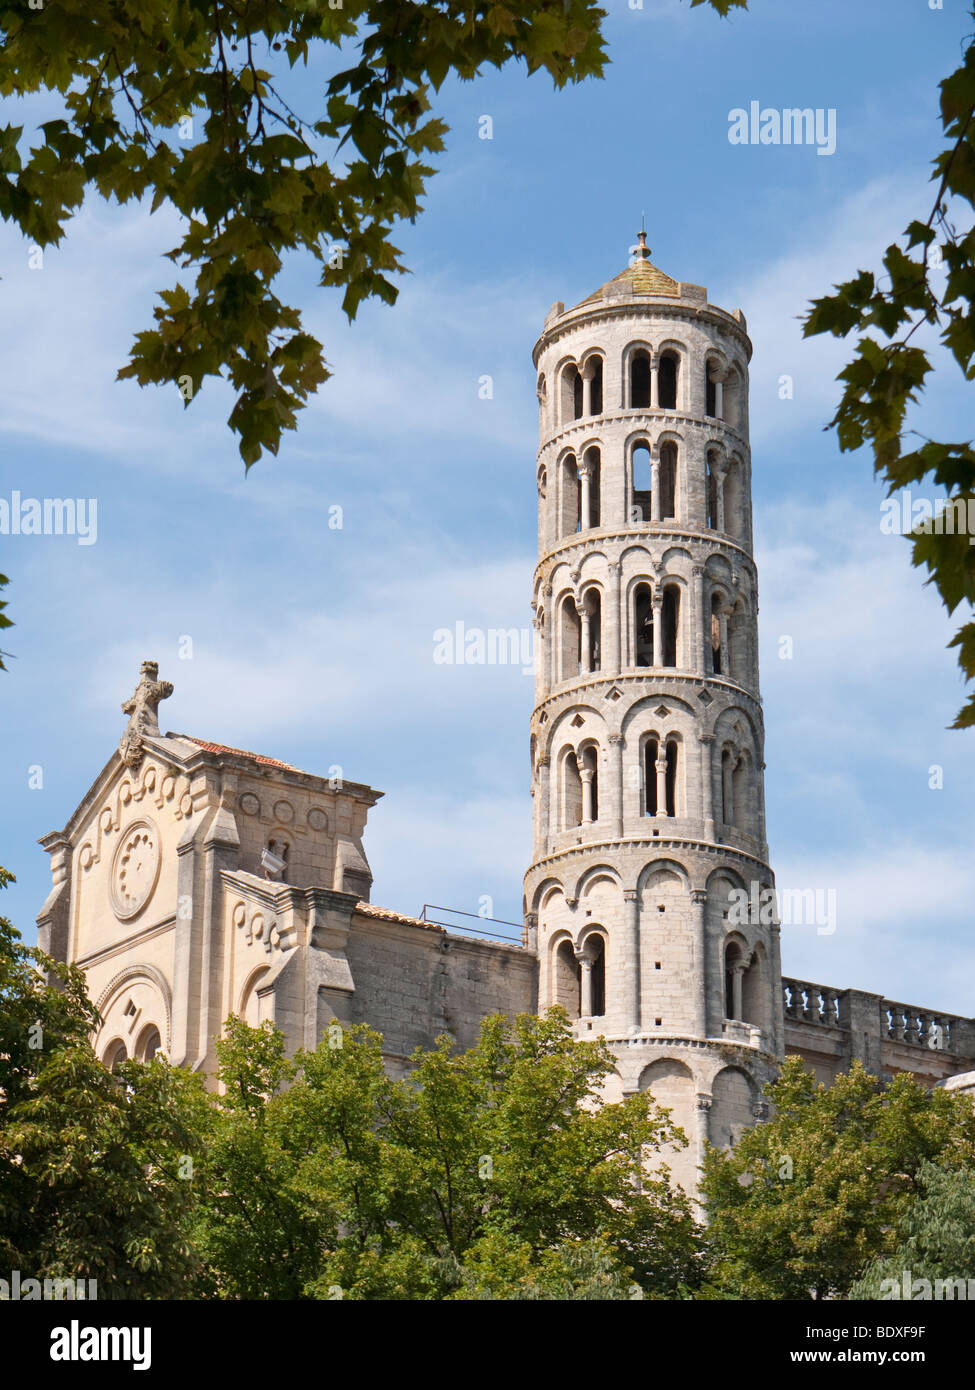 The Tour Fénestrelle, 42 meters high romanesque campanile of the St. Théodorit cathedral at Uzès, southern France. Stock Photo